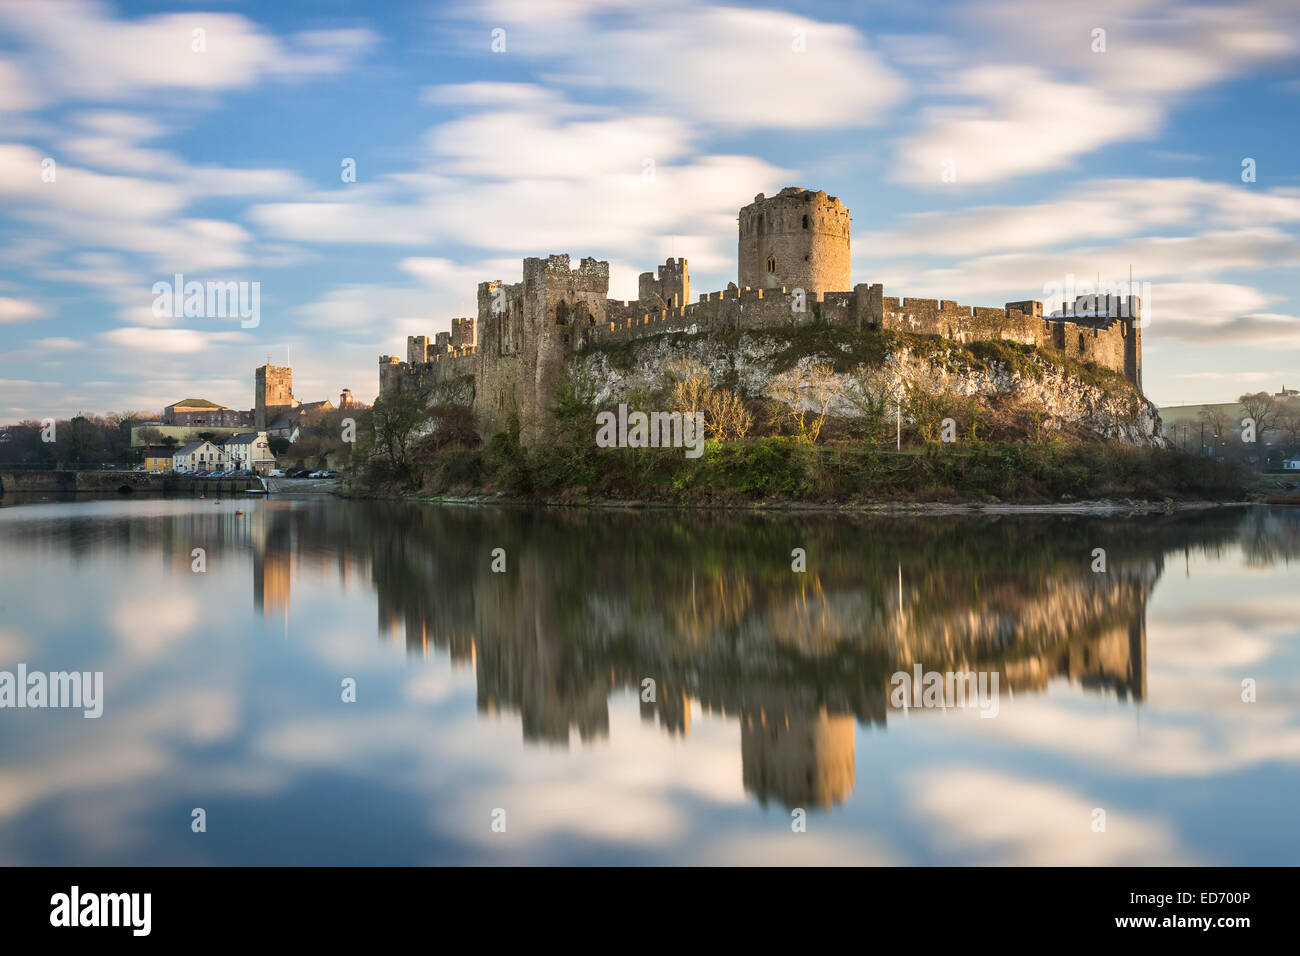 Pembroke Castle at sunset with reflections in the moat mill pond. Long exposure to blur cloud movement and make castle stand out Stock Photo